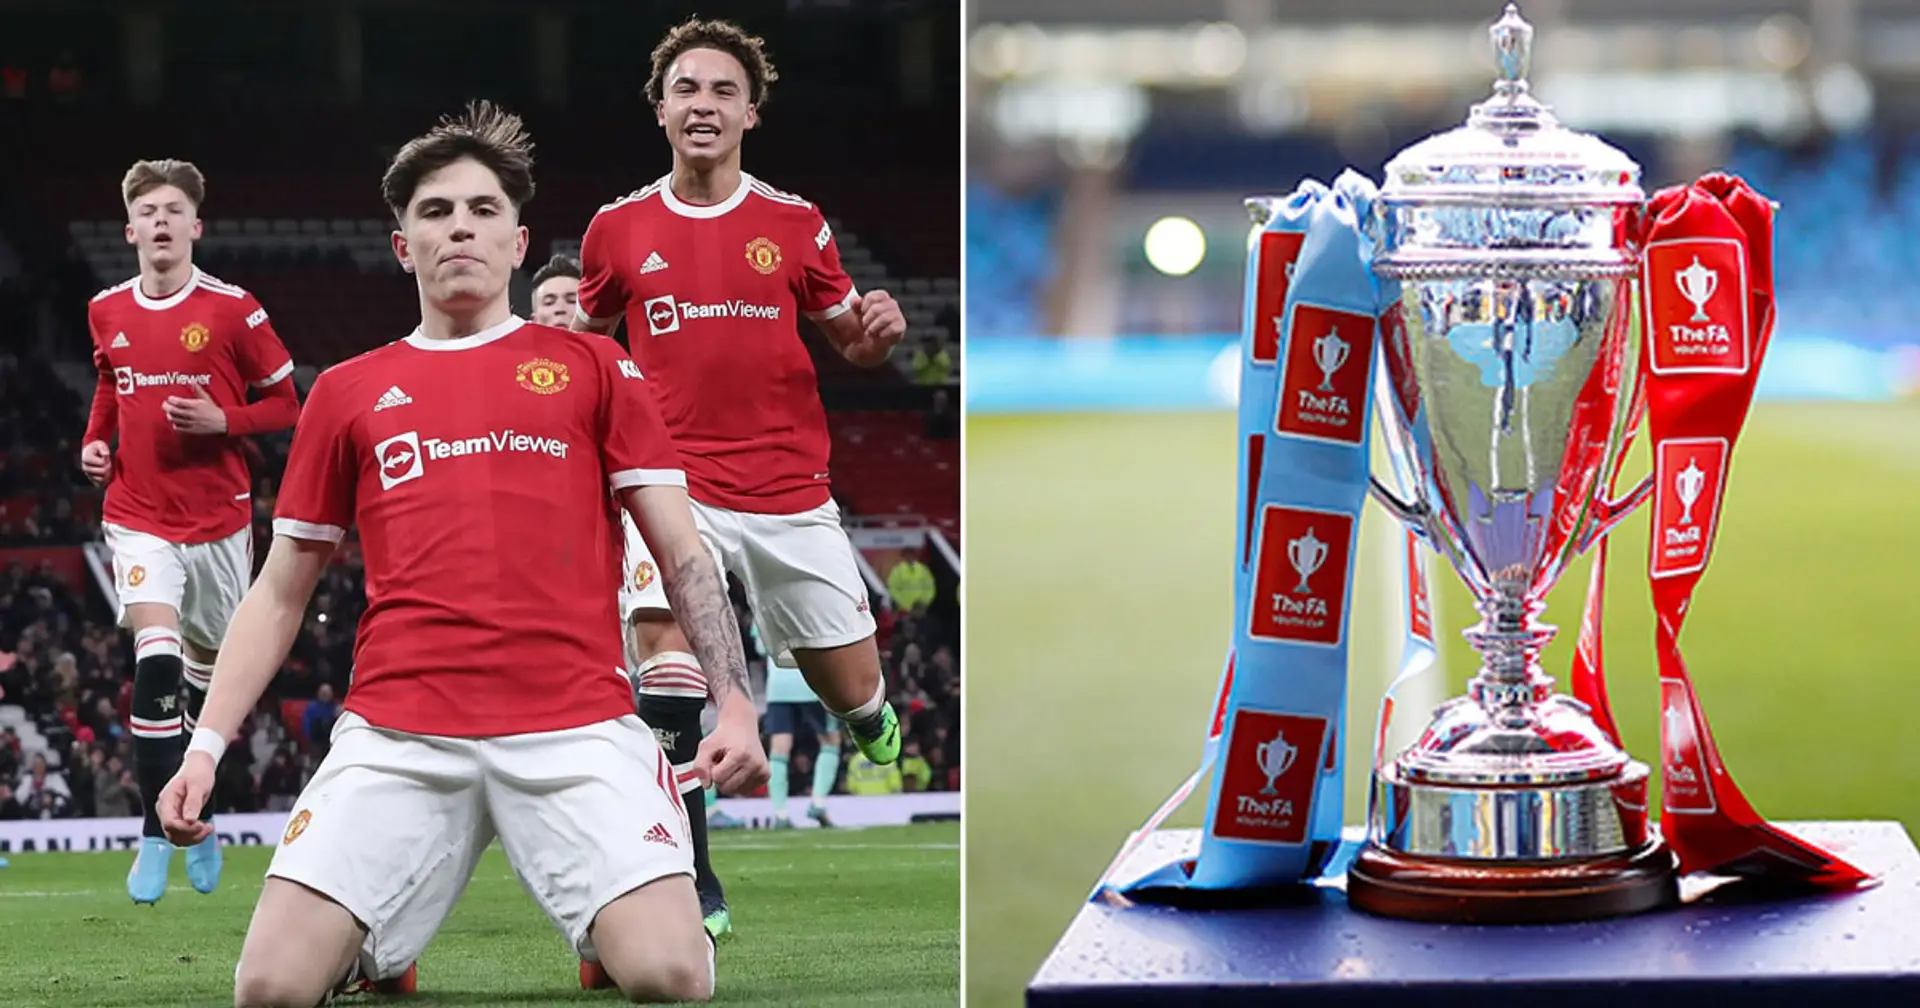 Man United to set FA Youth Cup final attendance record vs Nottingham Forest